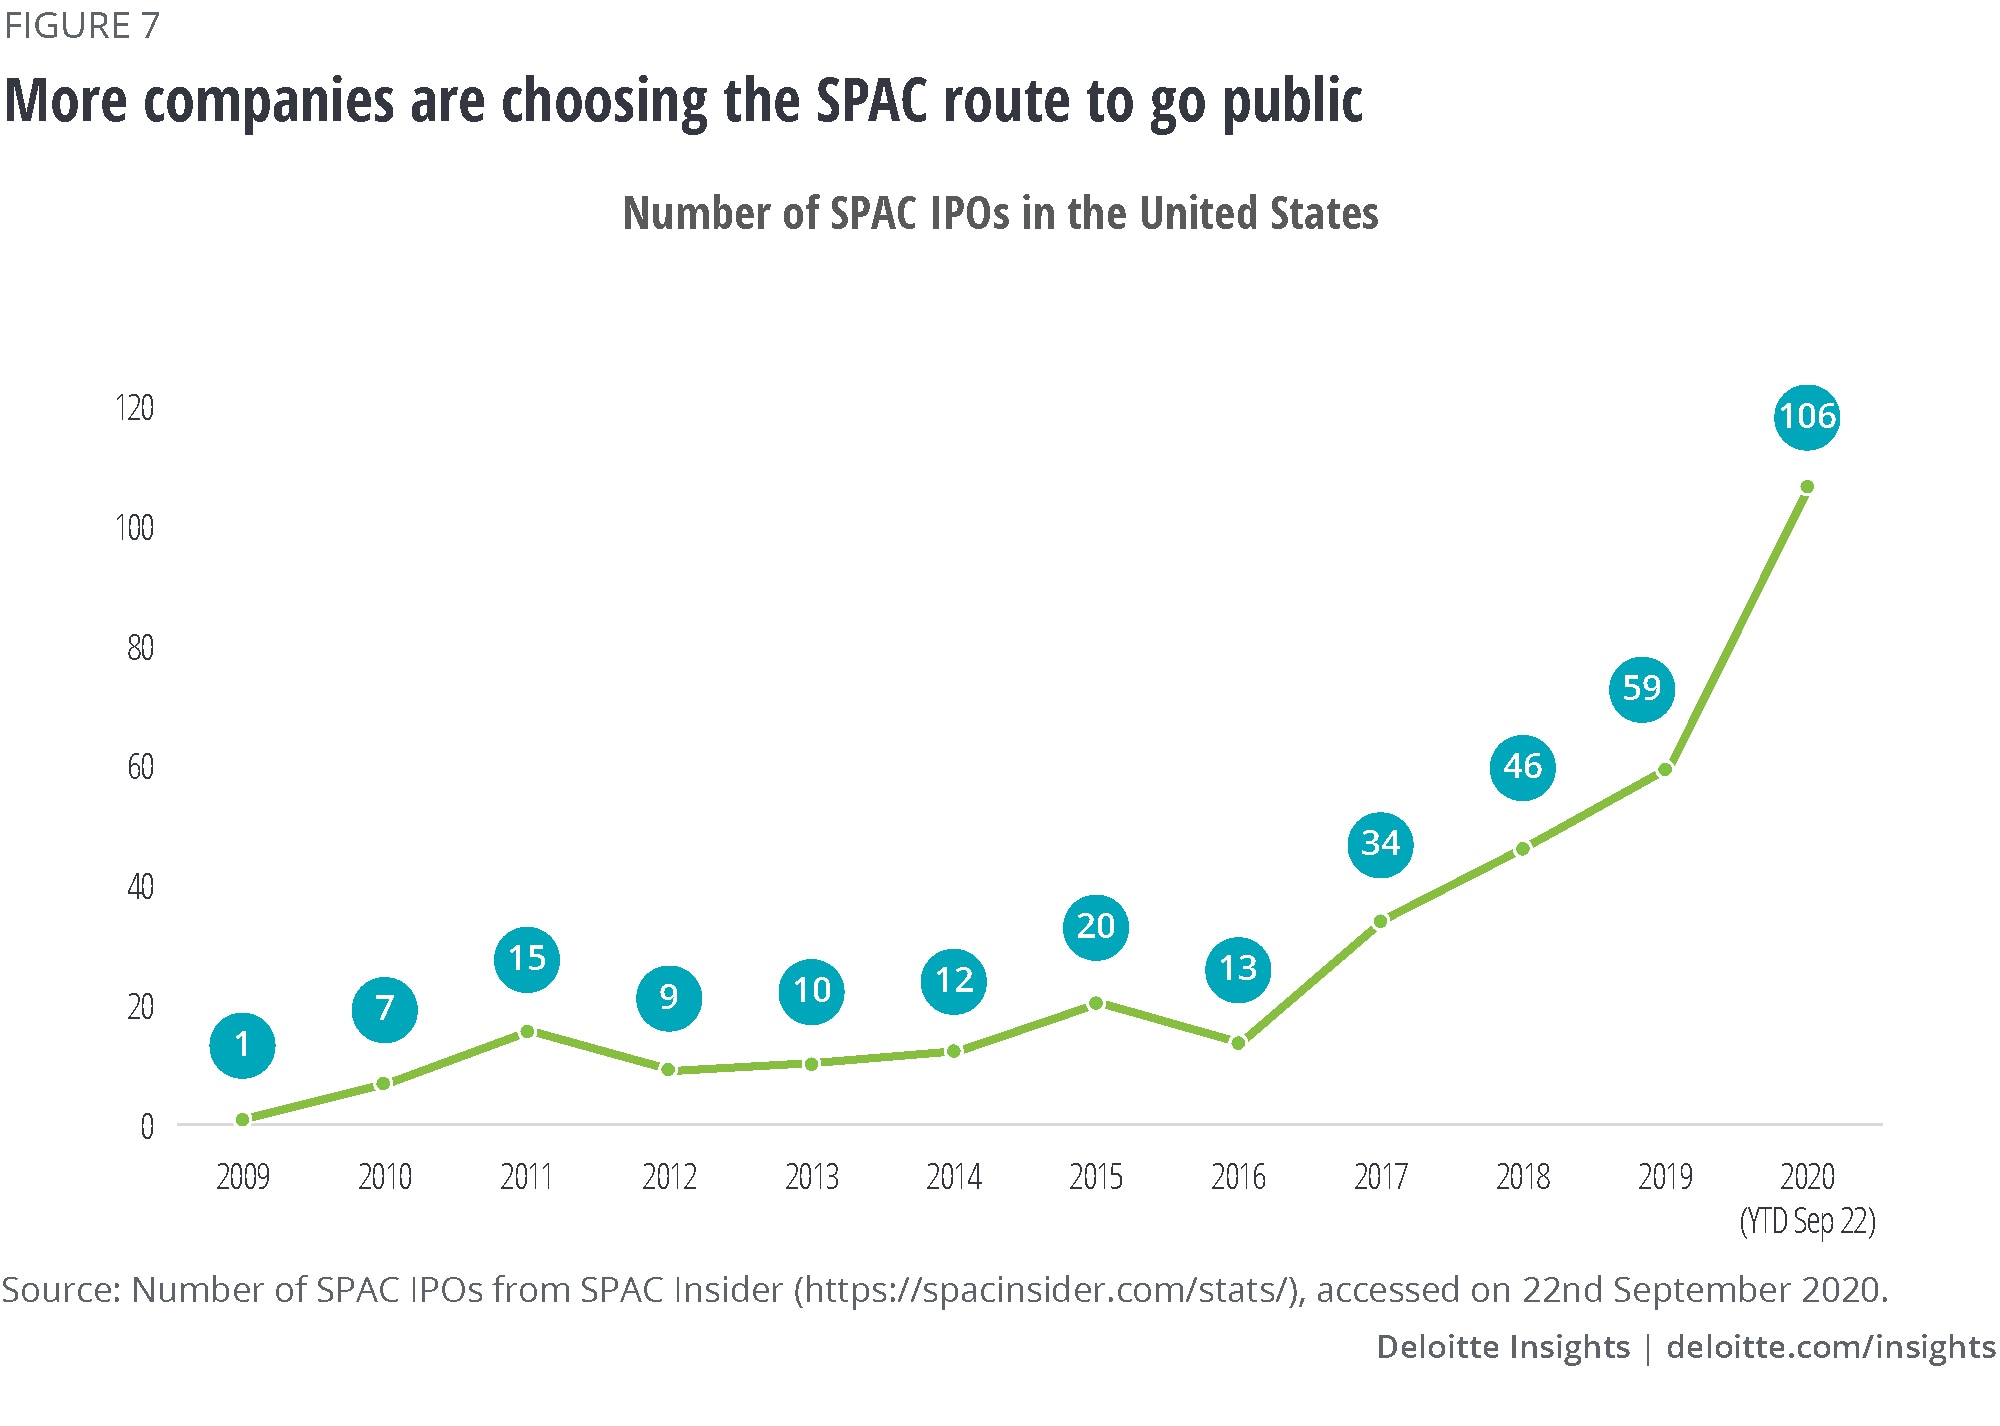 SPAC IPOs have grown substantially since 2017 as more companies choose the SPAC route to go public